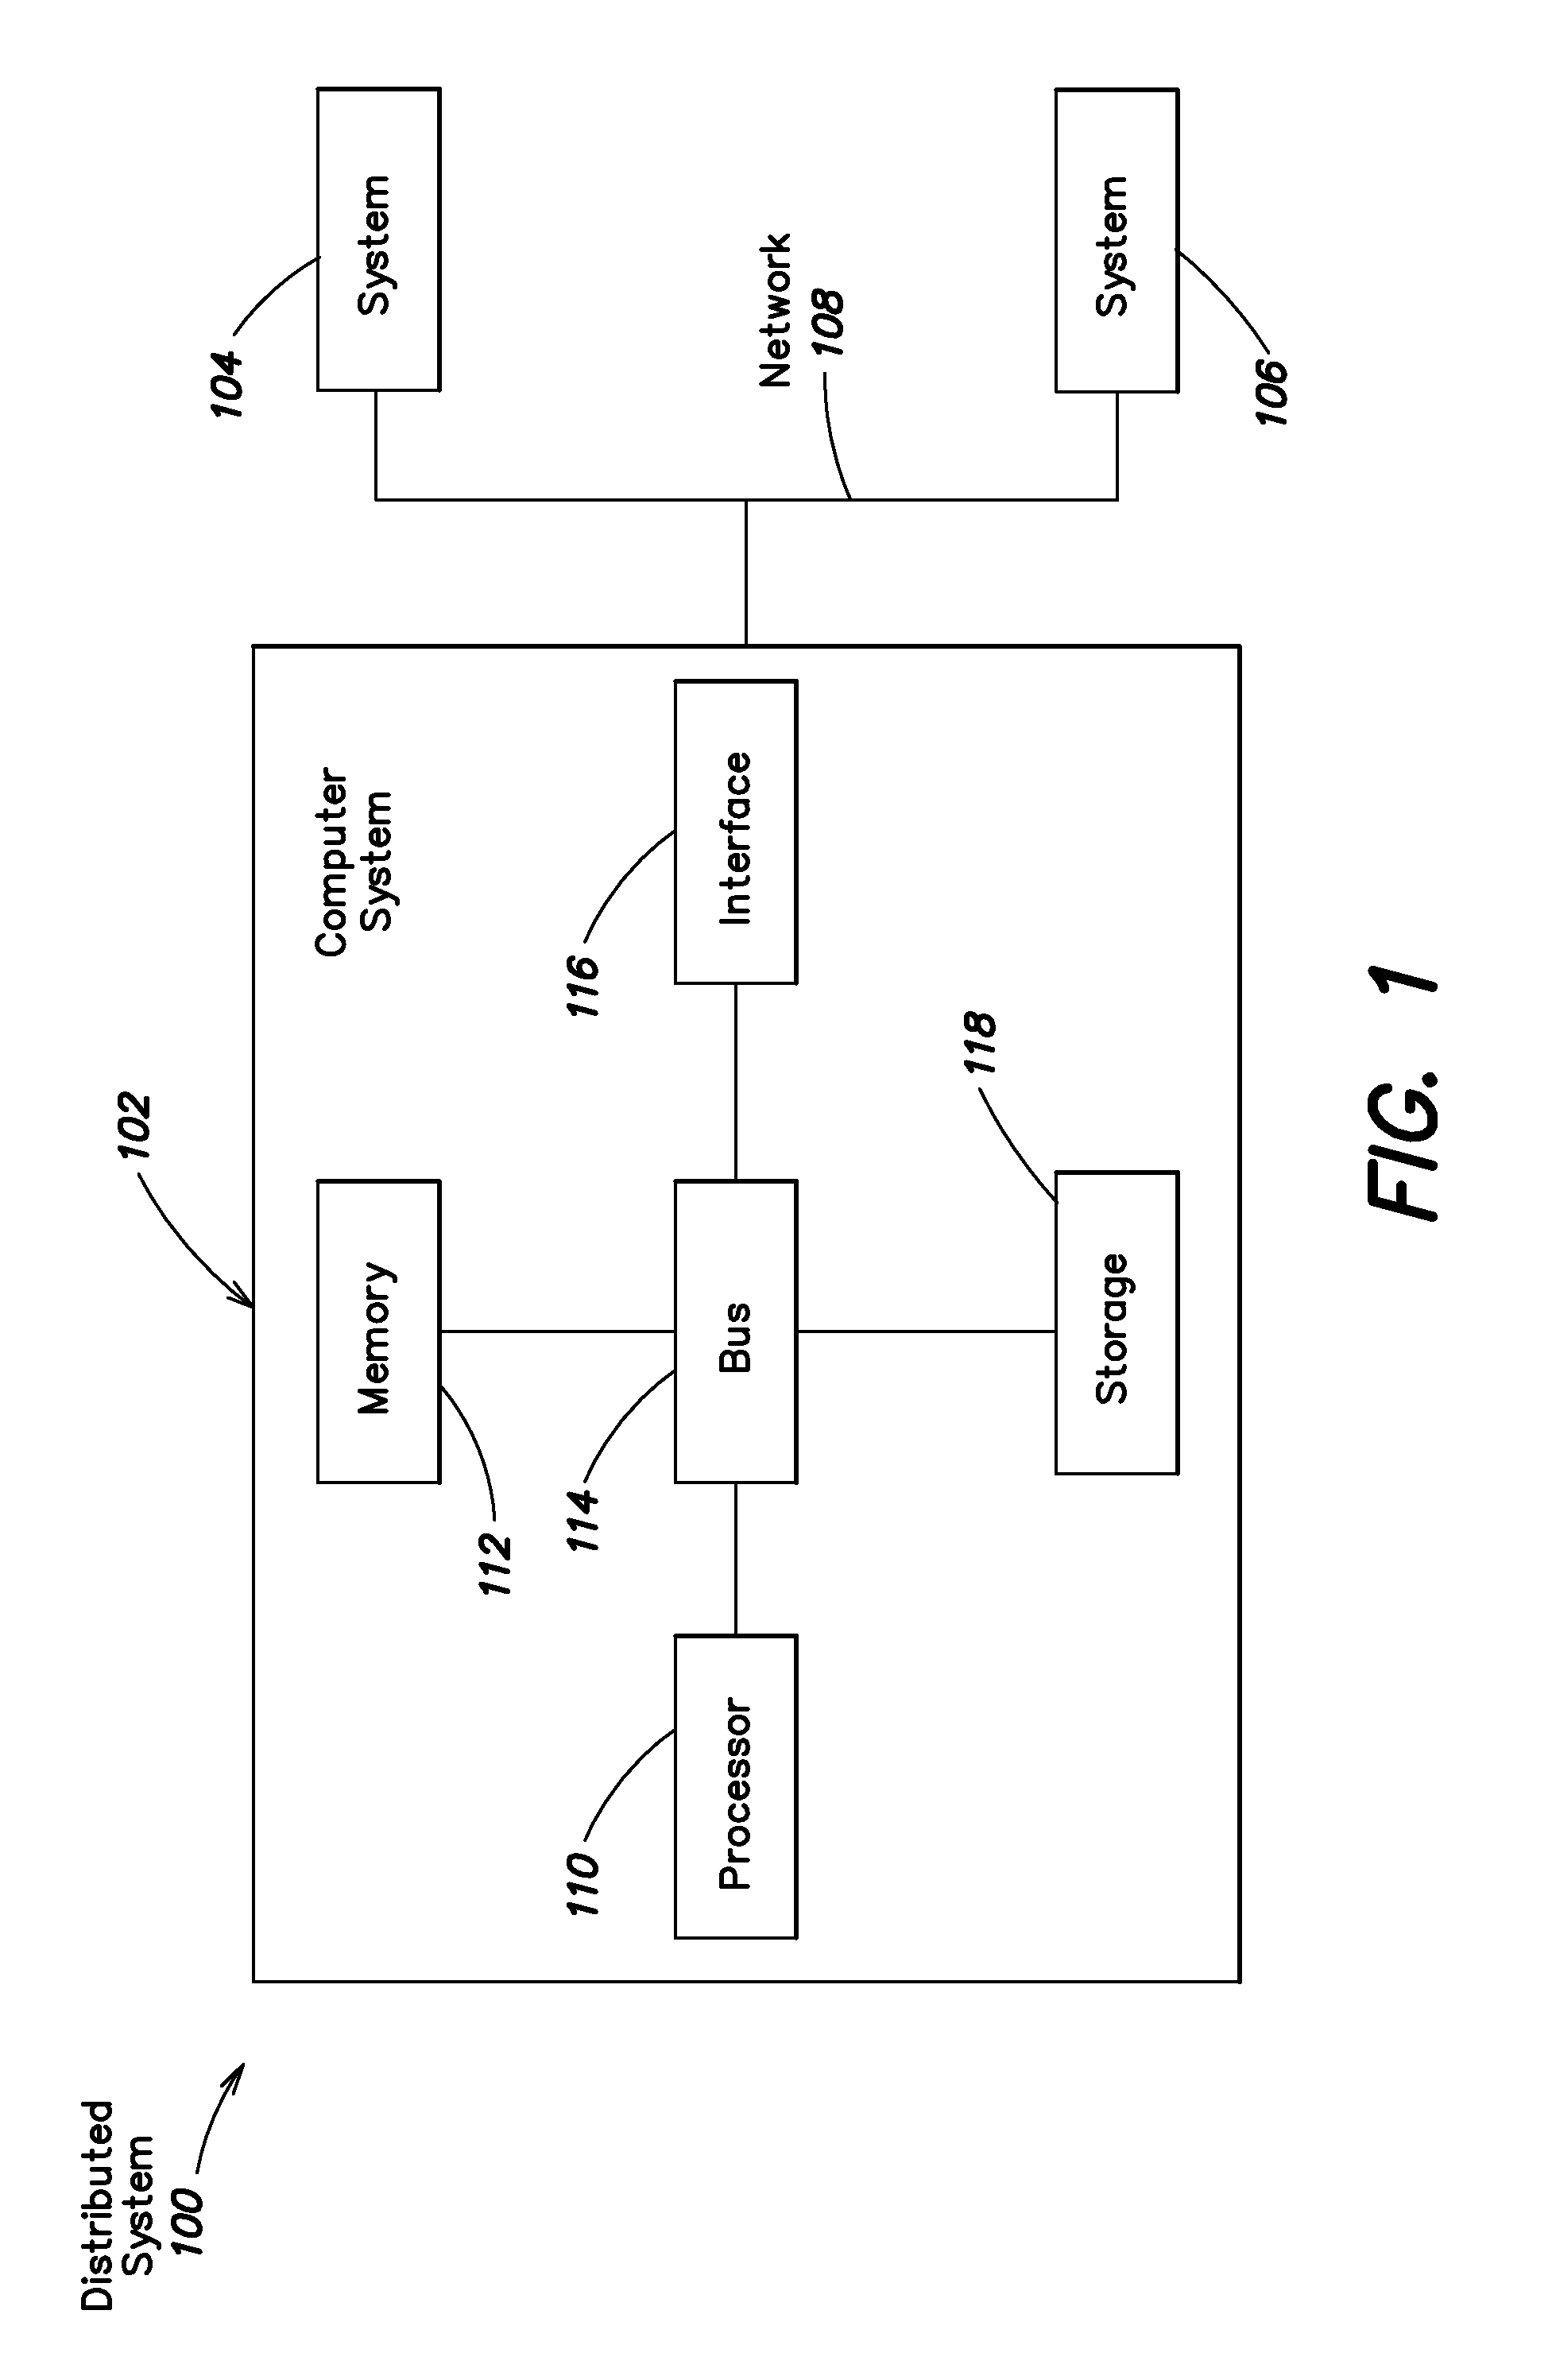 Method and system for selecting and optimizing bid recommendation algorithms